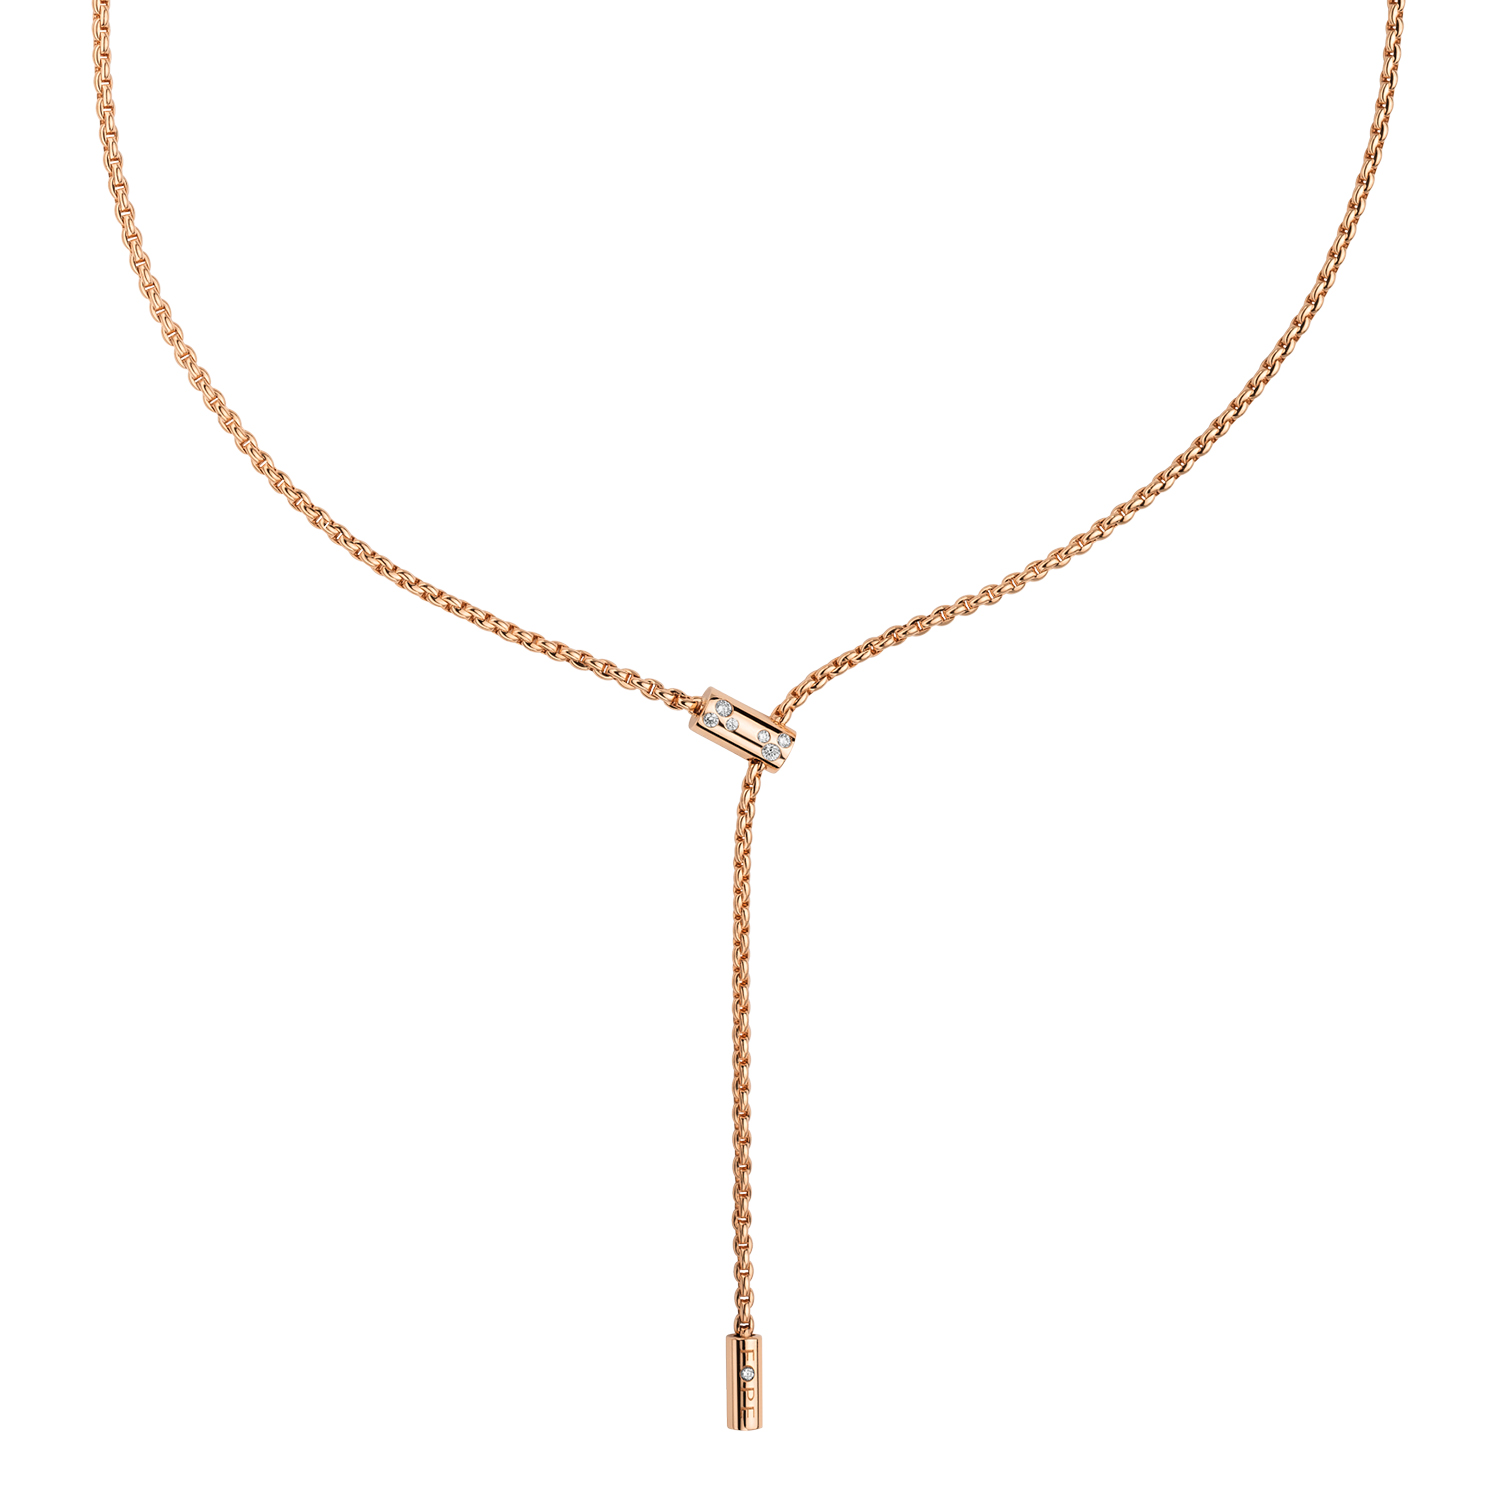 FOPE 18K ARIA NECKLACE